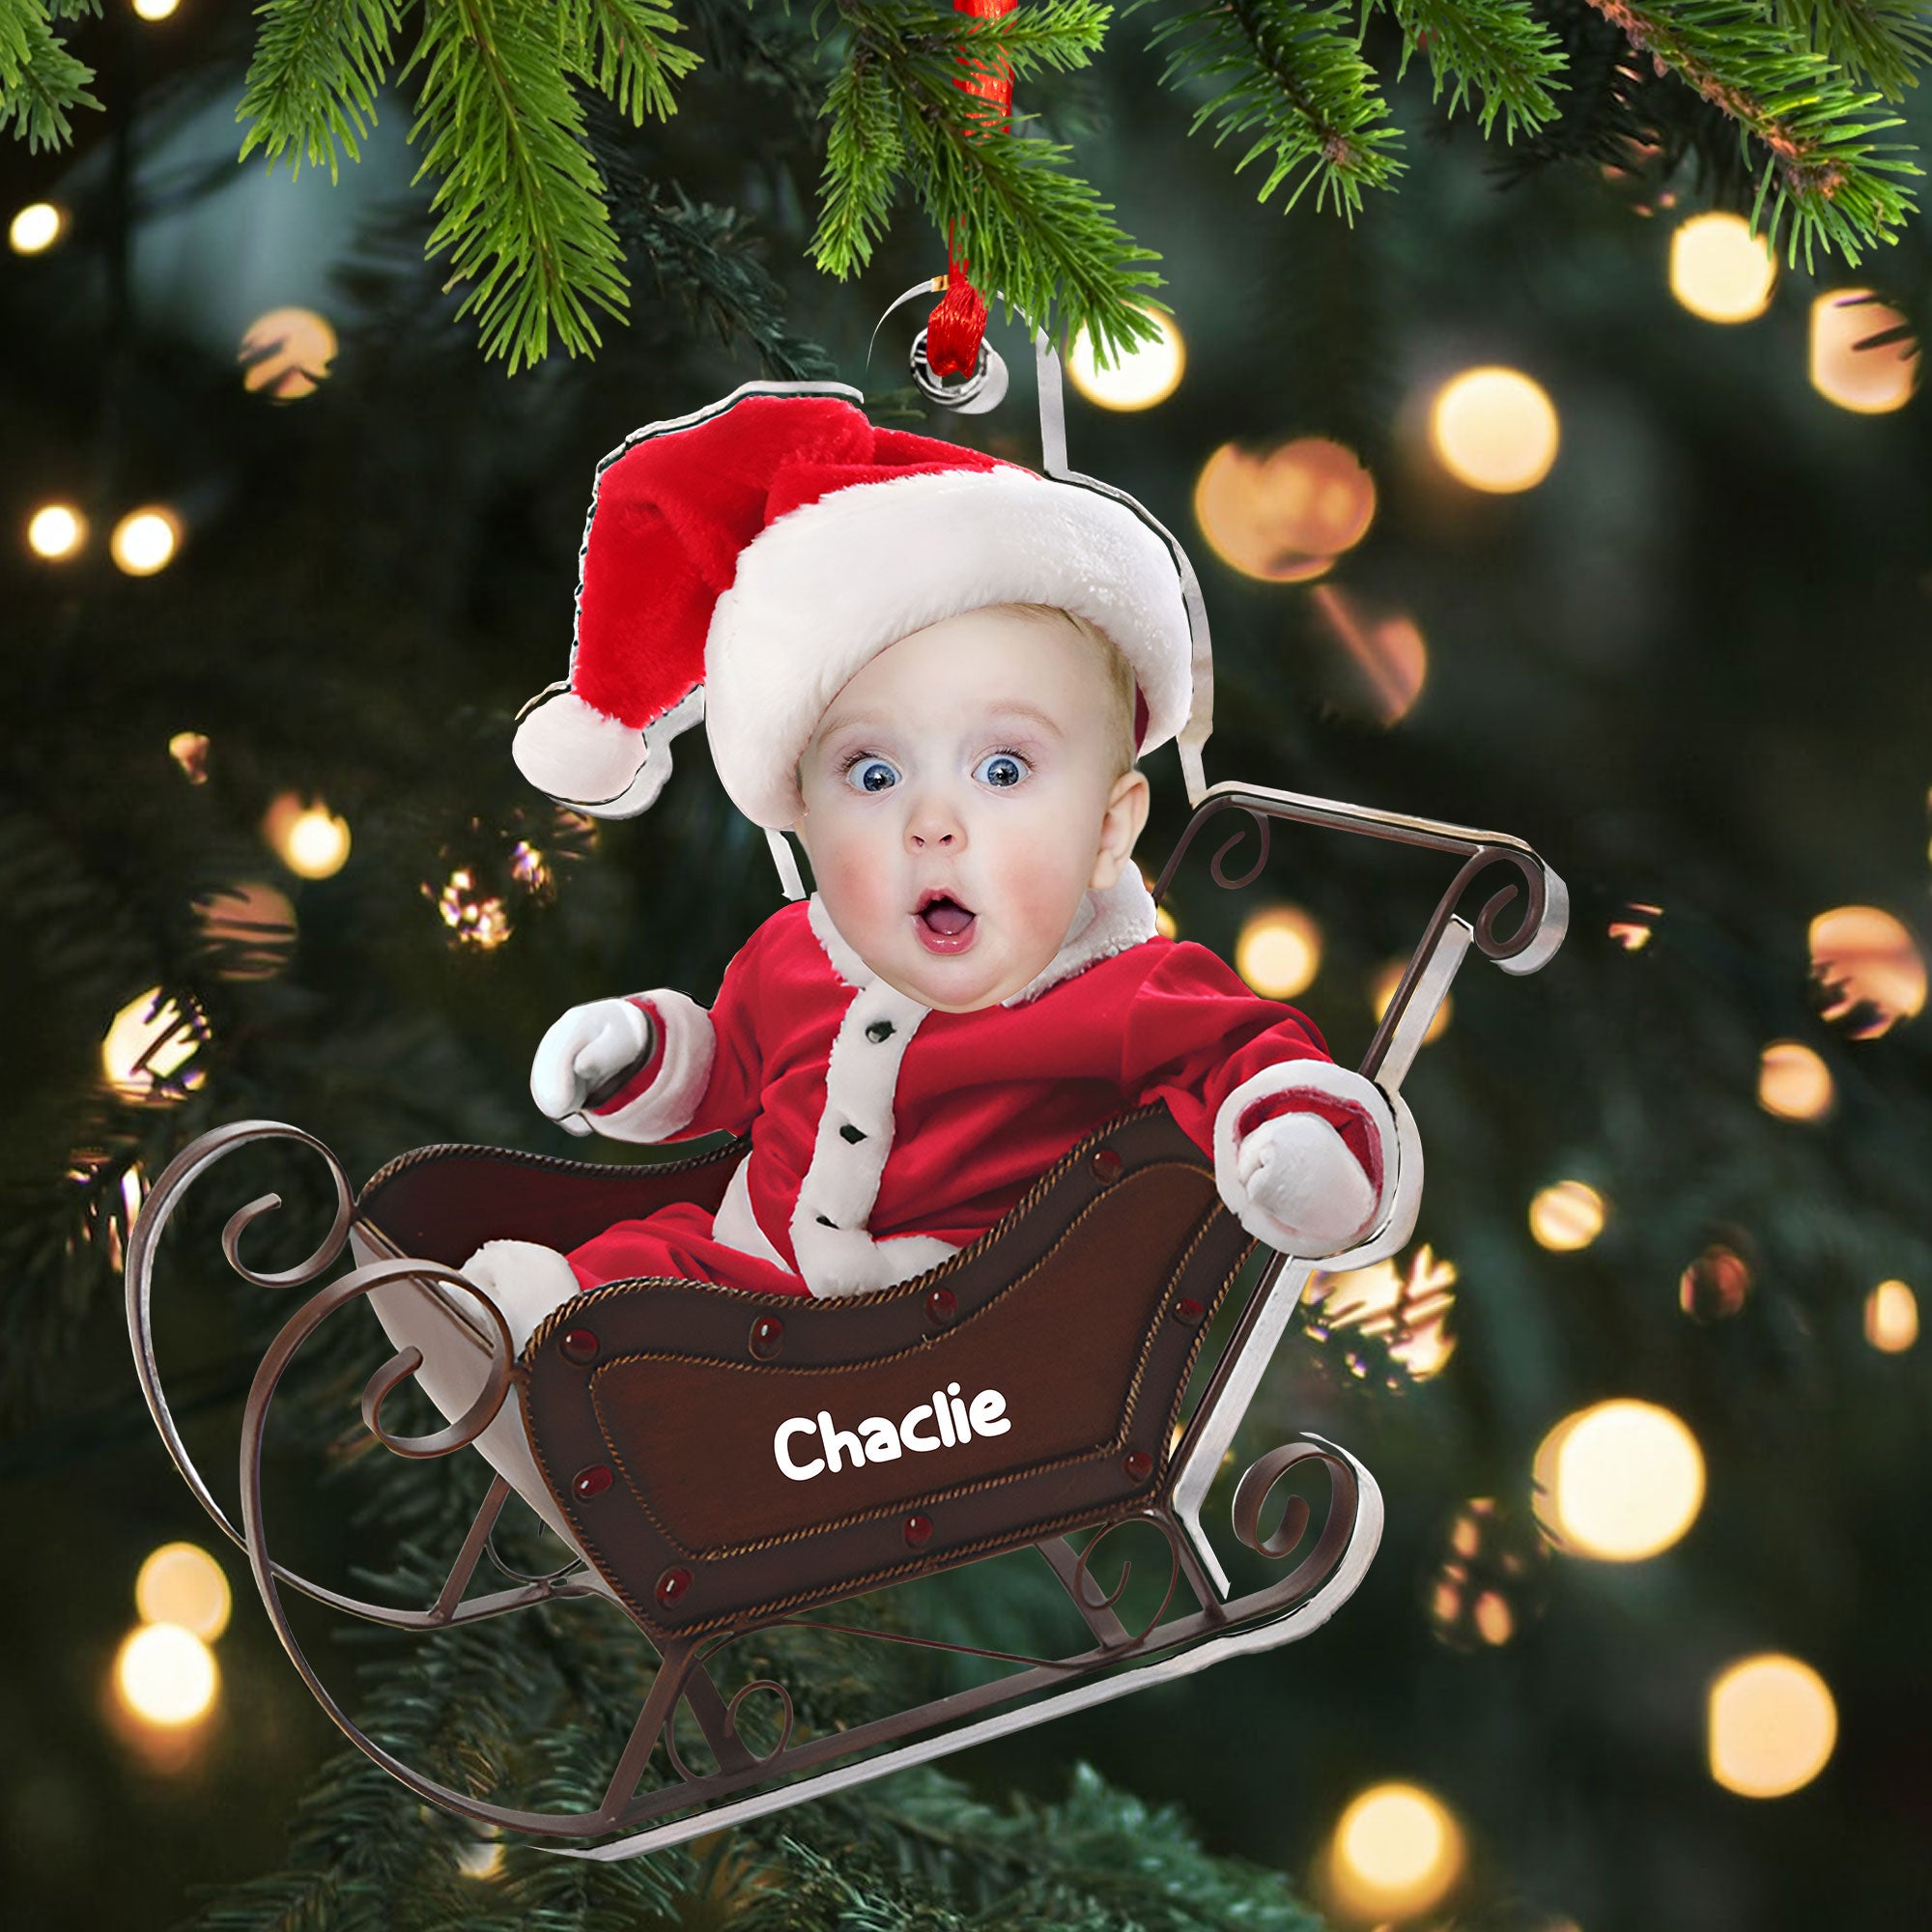 Baby In Christmas Sleigh - Custom Photo And Name, Personalized Acrylic Ornament - Gift For Christmas, Family Gift